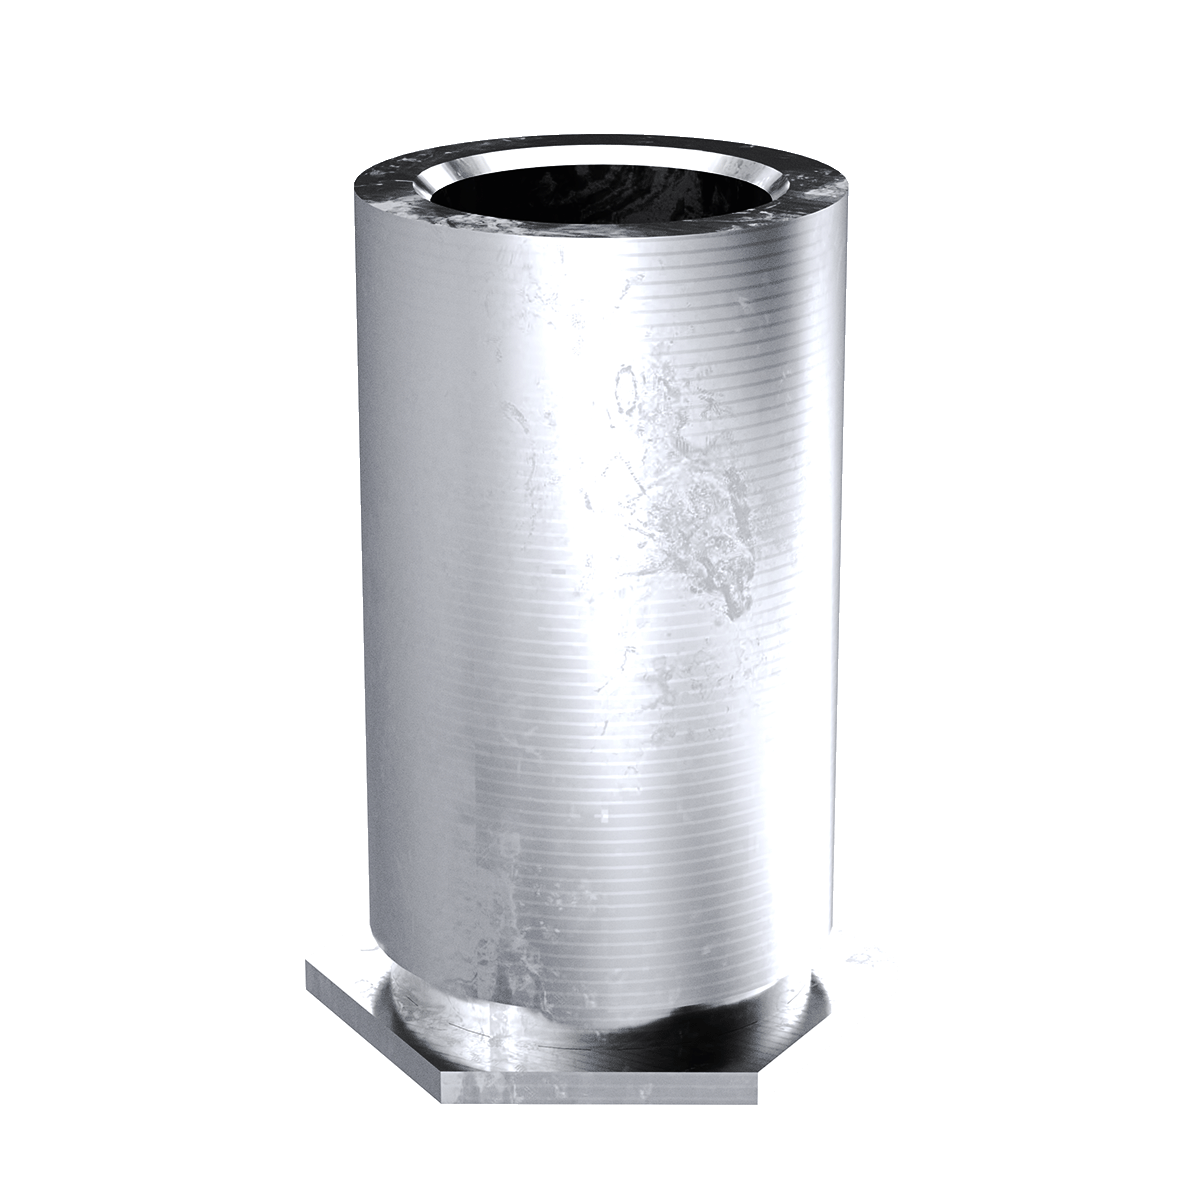 Self-Clinching Standoff, Through Unthreaded, 300 Series Stainless Steel, Passivated, 0.116 x 0.562, 100 Pack